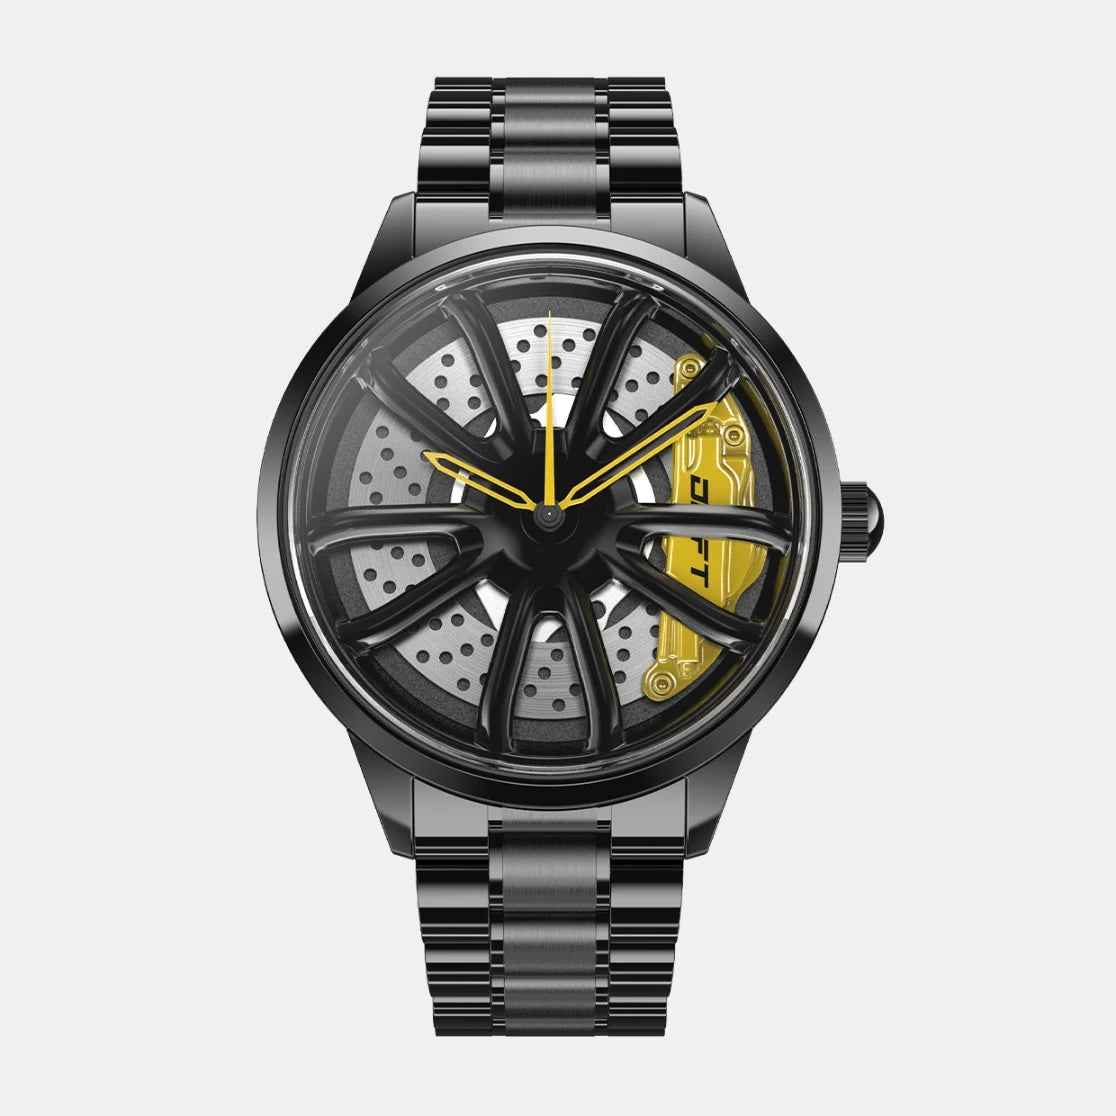 Illuminate your style with our yellow Performance GT Rim Watch! Crafted by a German startup, these precision watches are tailored for motorsport, tuning, and auto enthusiasts. Ignite your passion! #id_46744365433162